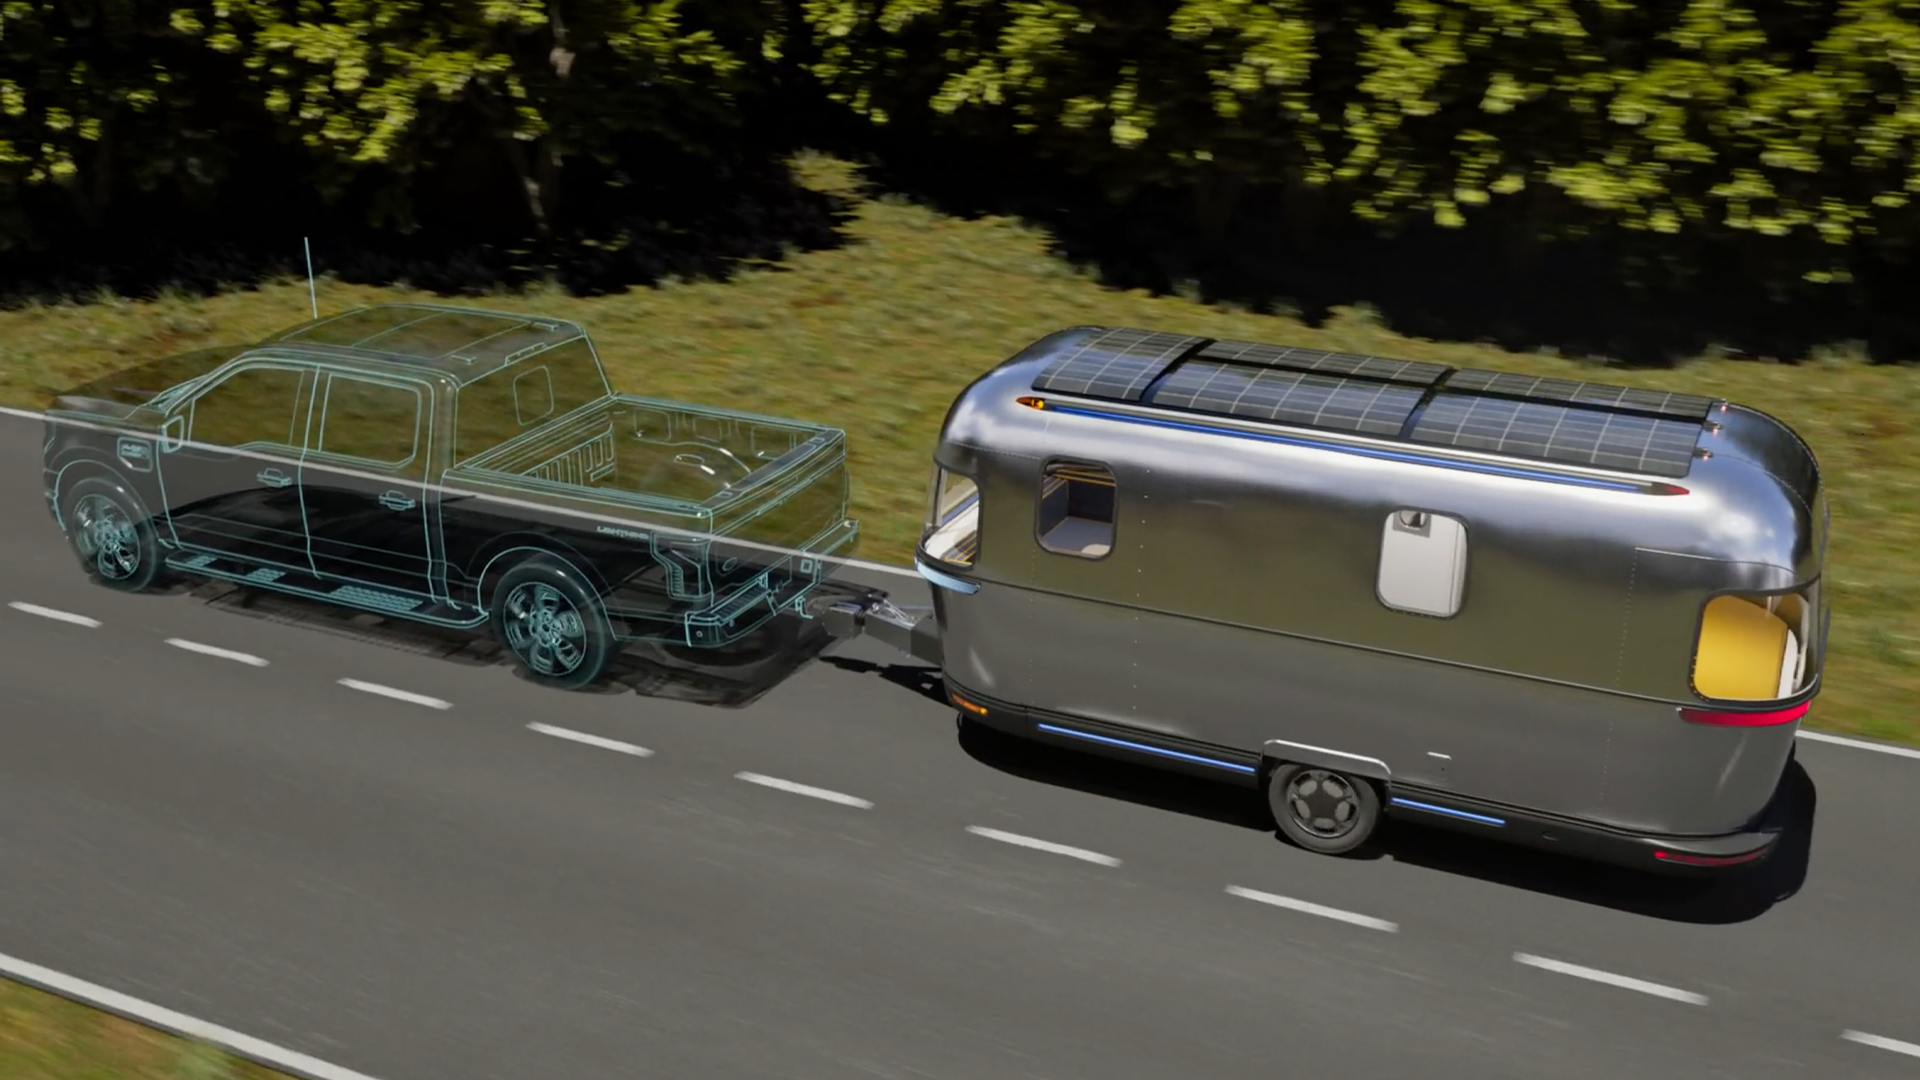 Mockup of the Airstream eStream on the road, pulled by a pickup truck